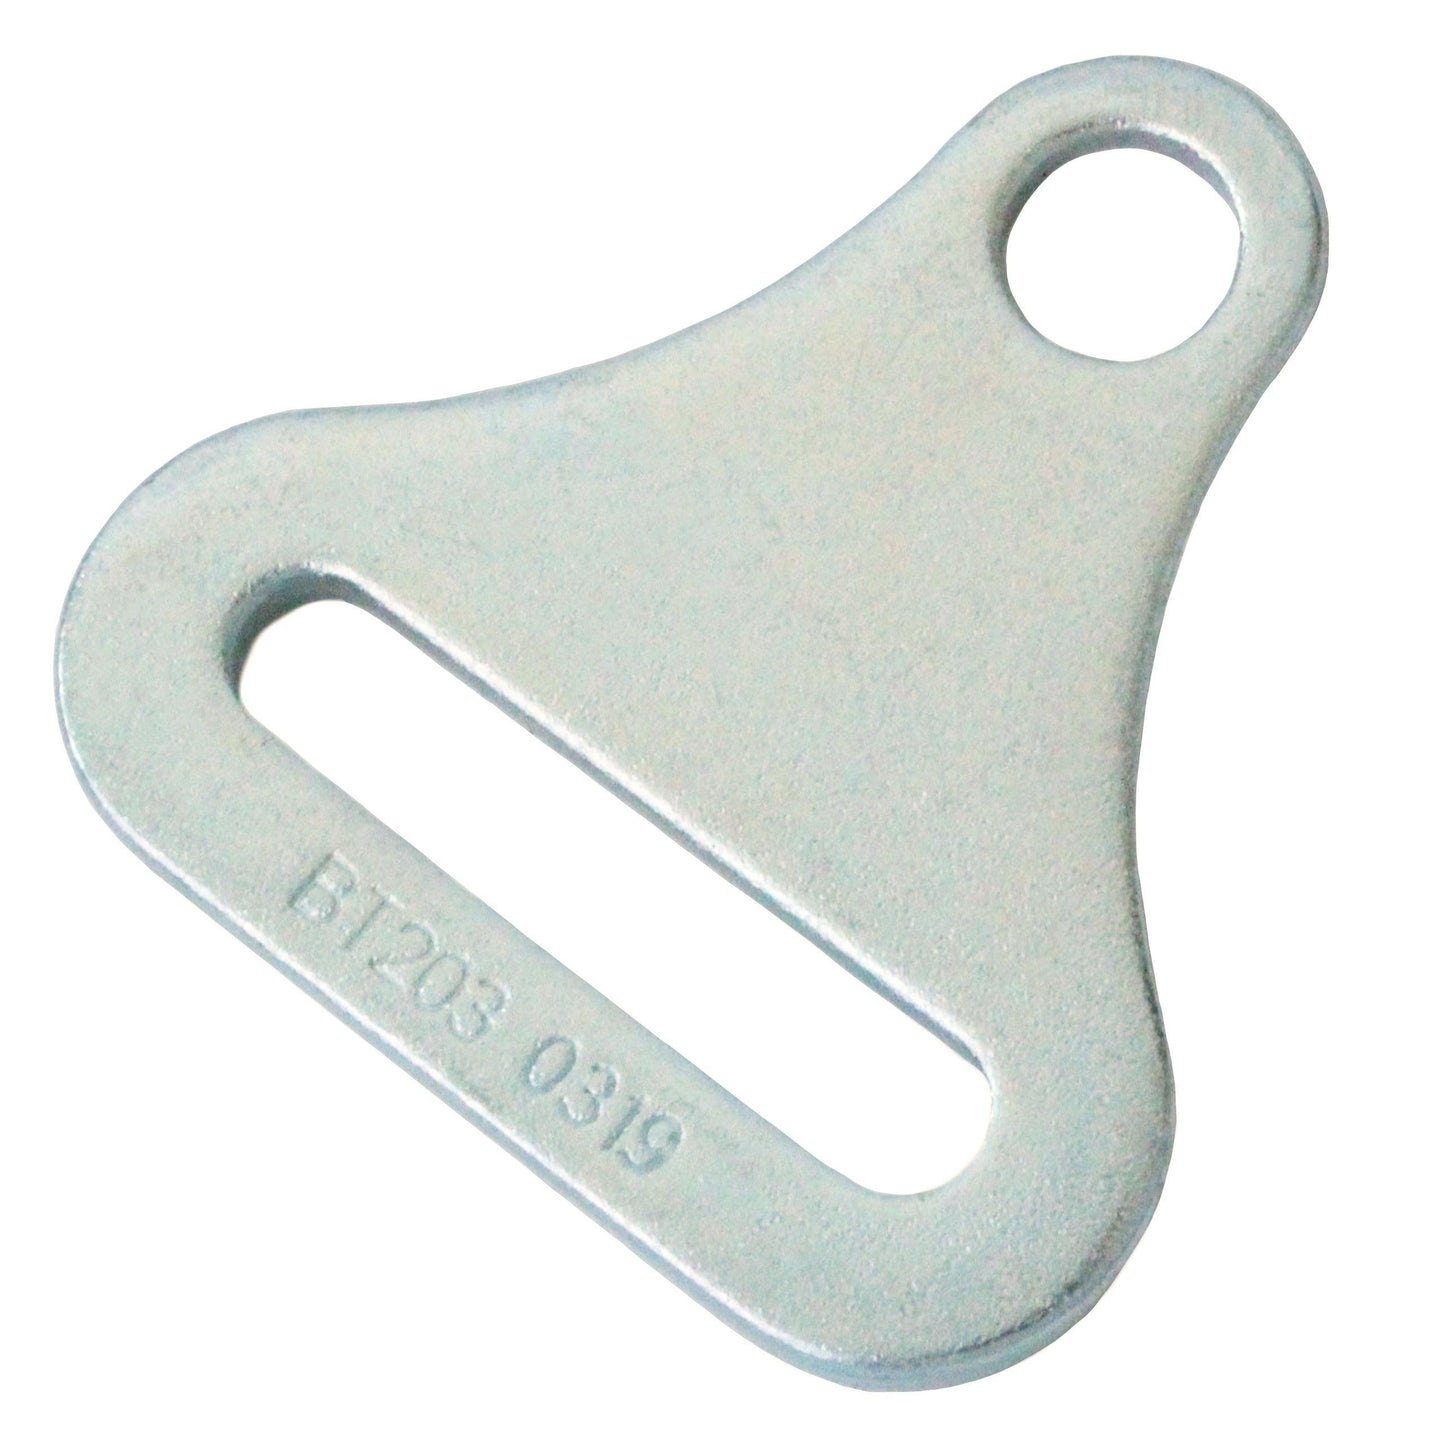 2 Inch Triangular Bolt Plate - Boxer Tools